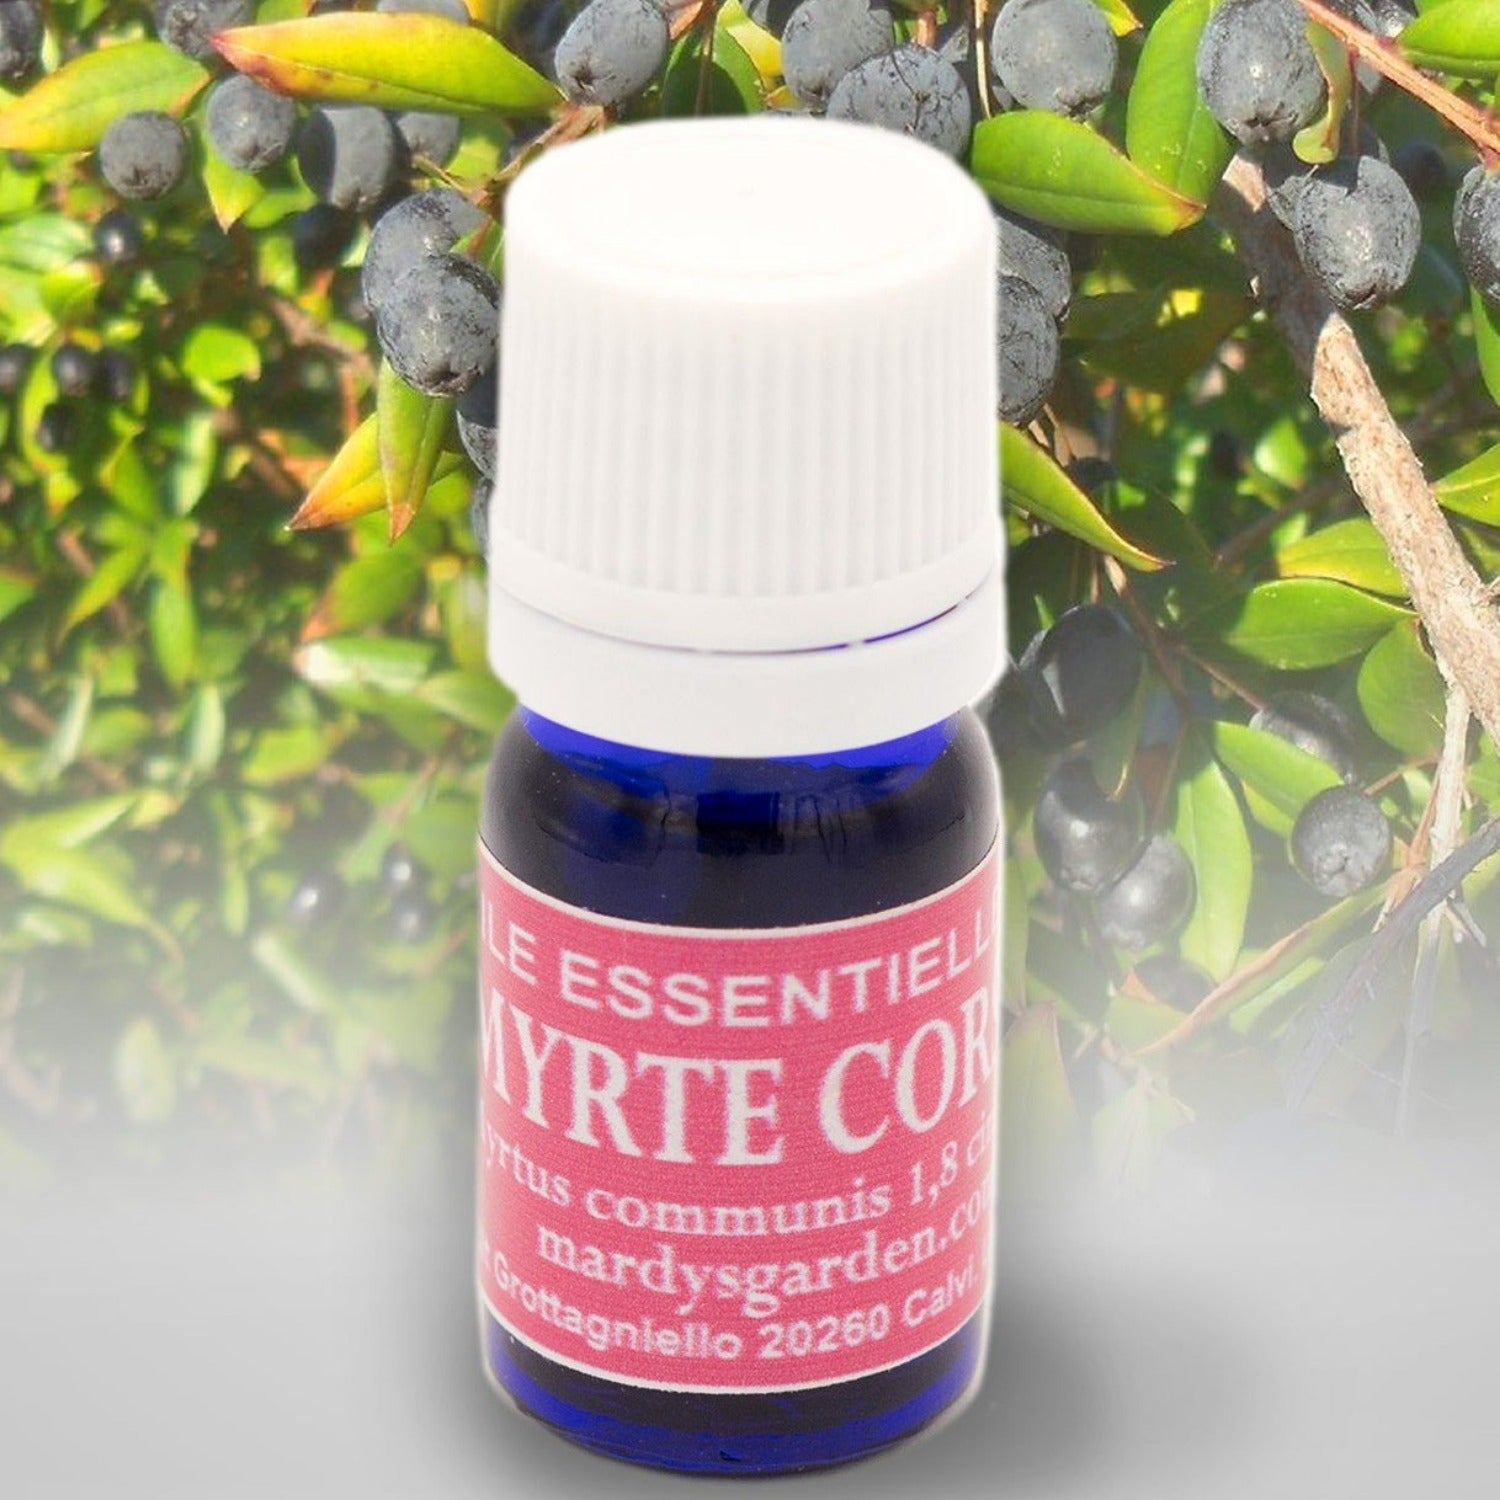 Green Myrtle Essential Oil 5ml. Organic Essential Oil from Corsica. Myrtus Communis. 100% pure and natural, undiluted. Can be used on skin, food or aromatherapy